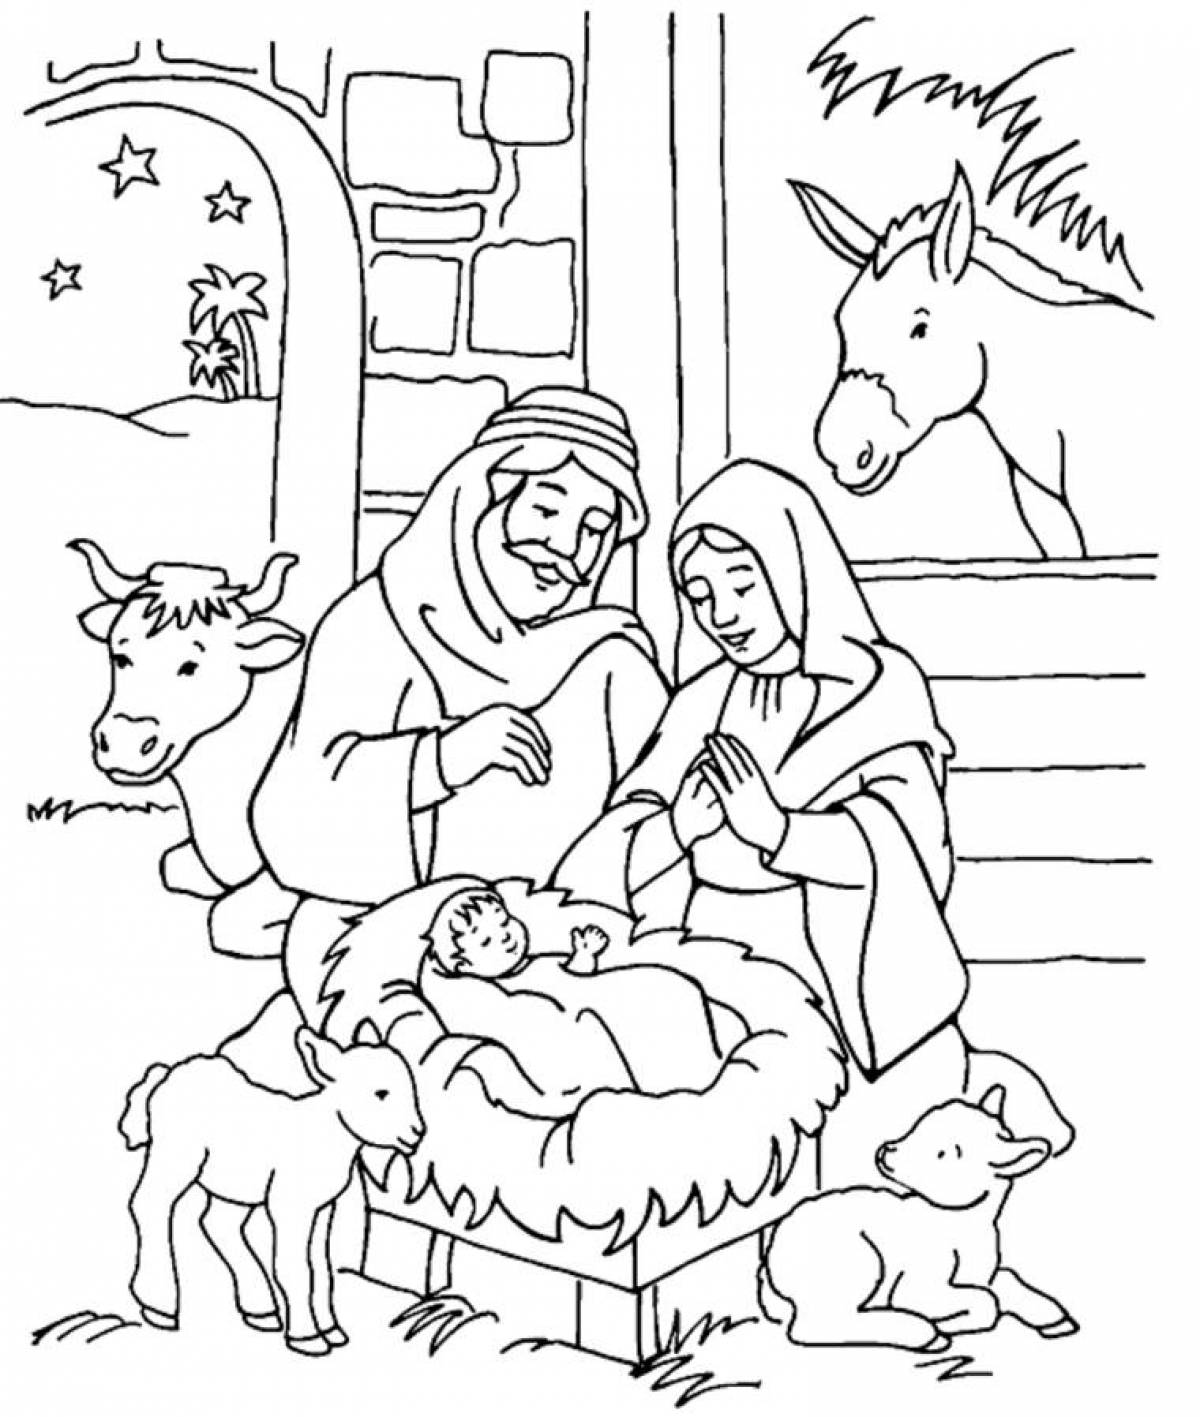 Deluxe Christmas coloring book for kids